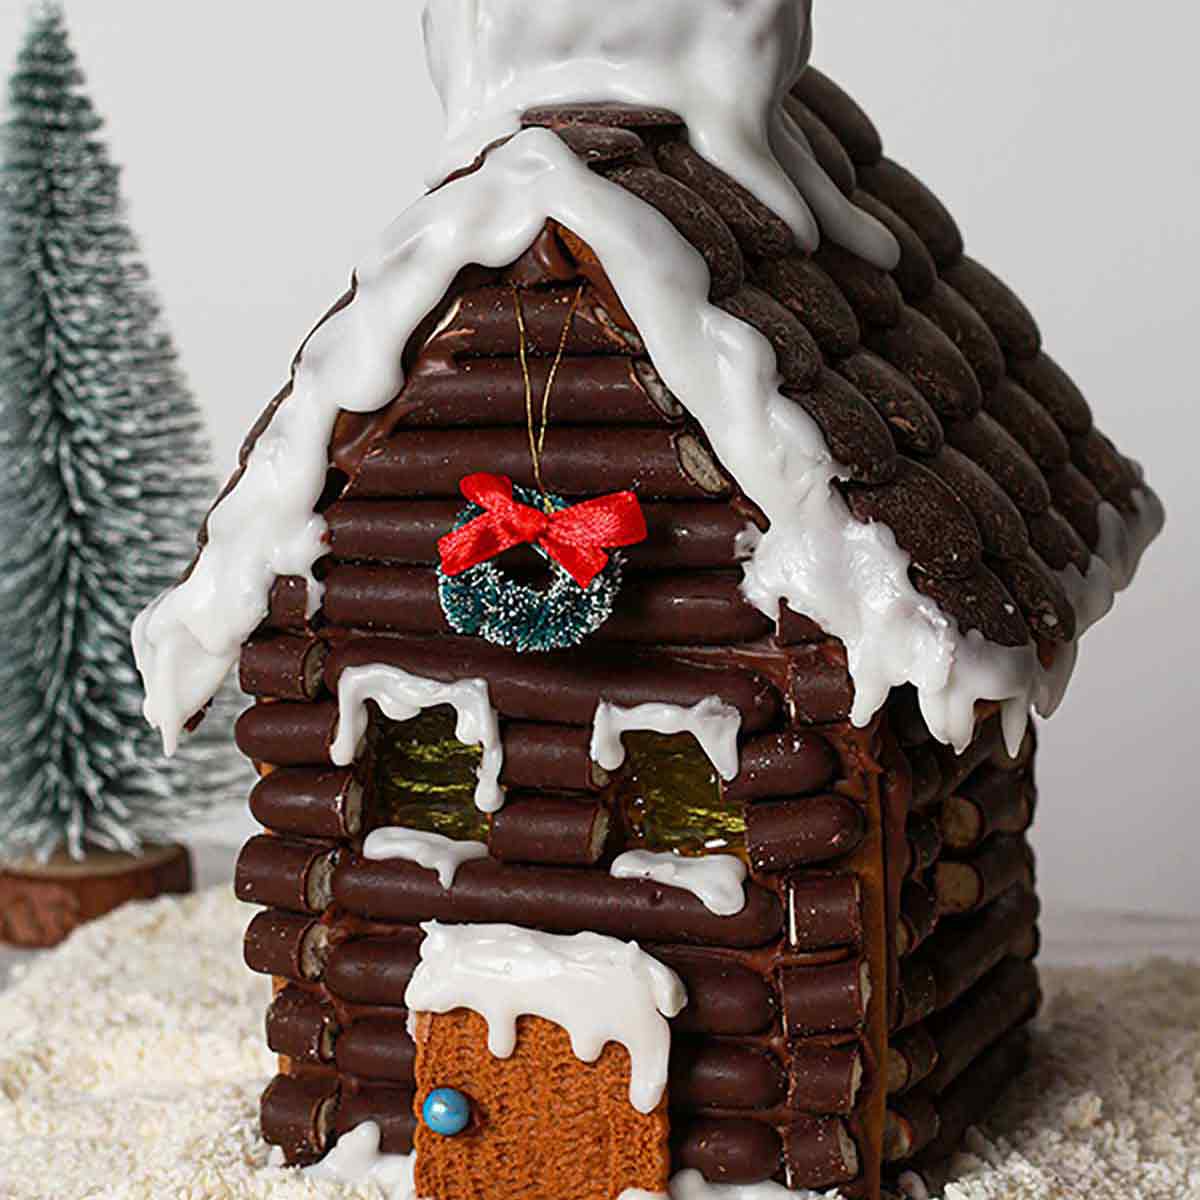 Chocolate Vegan Gingerbread House With A Snowy Background